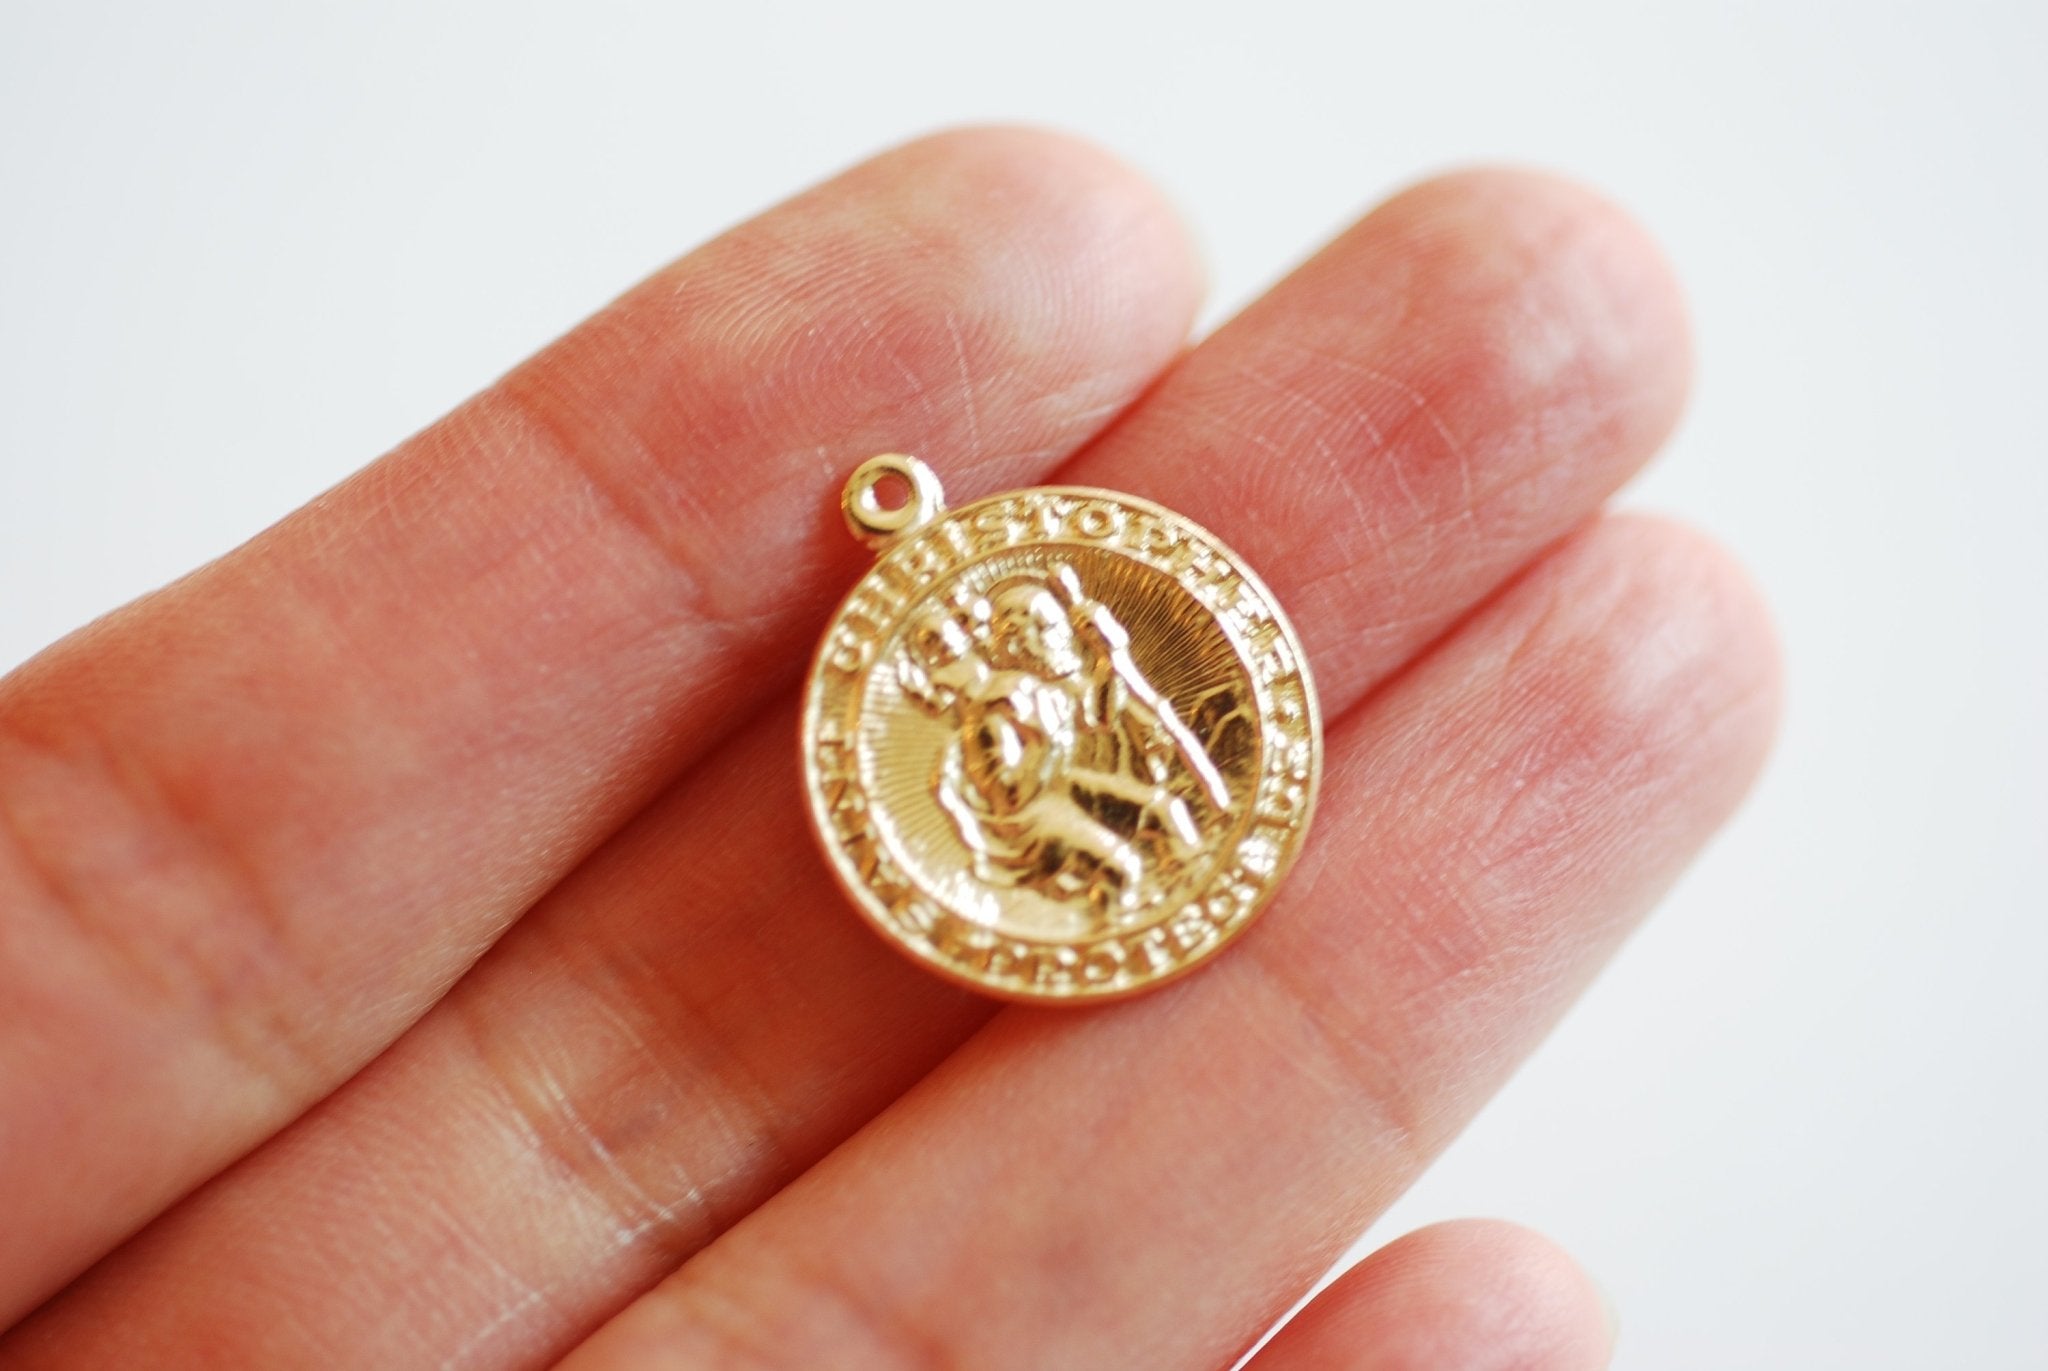 Wholesale 14k Gold Filled St Christopher Pendant-  Gold Filled Charms, Round Disc Charm, Saint Christopher Charm, Religious Charm, Catholic